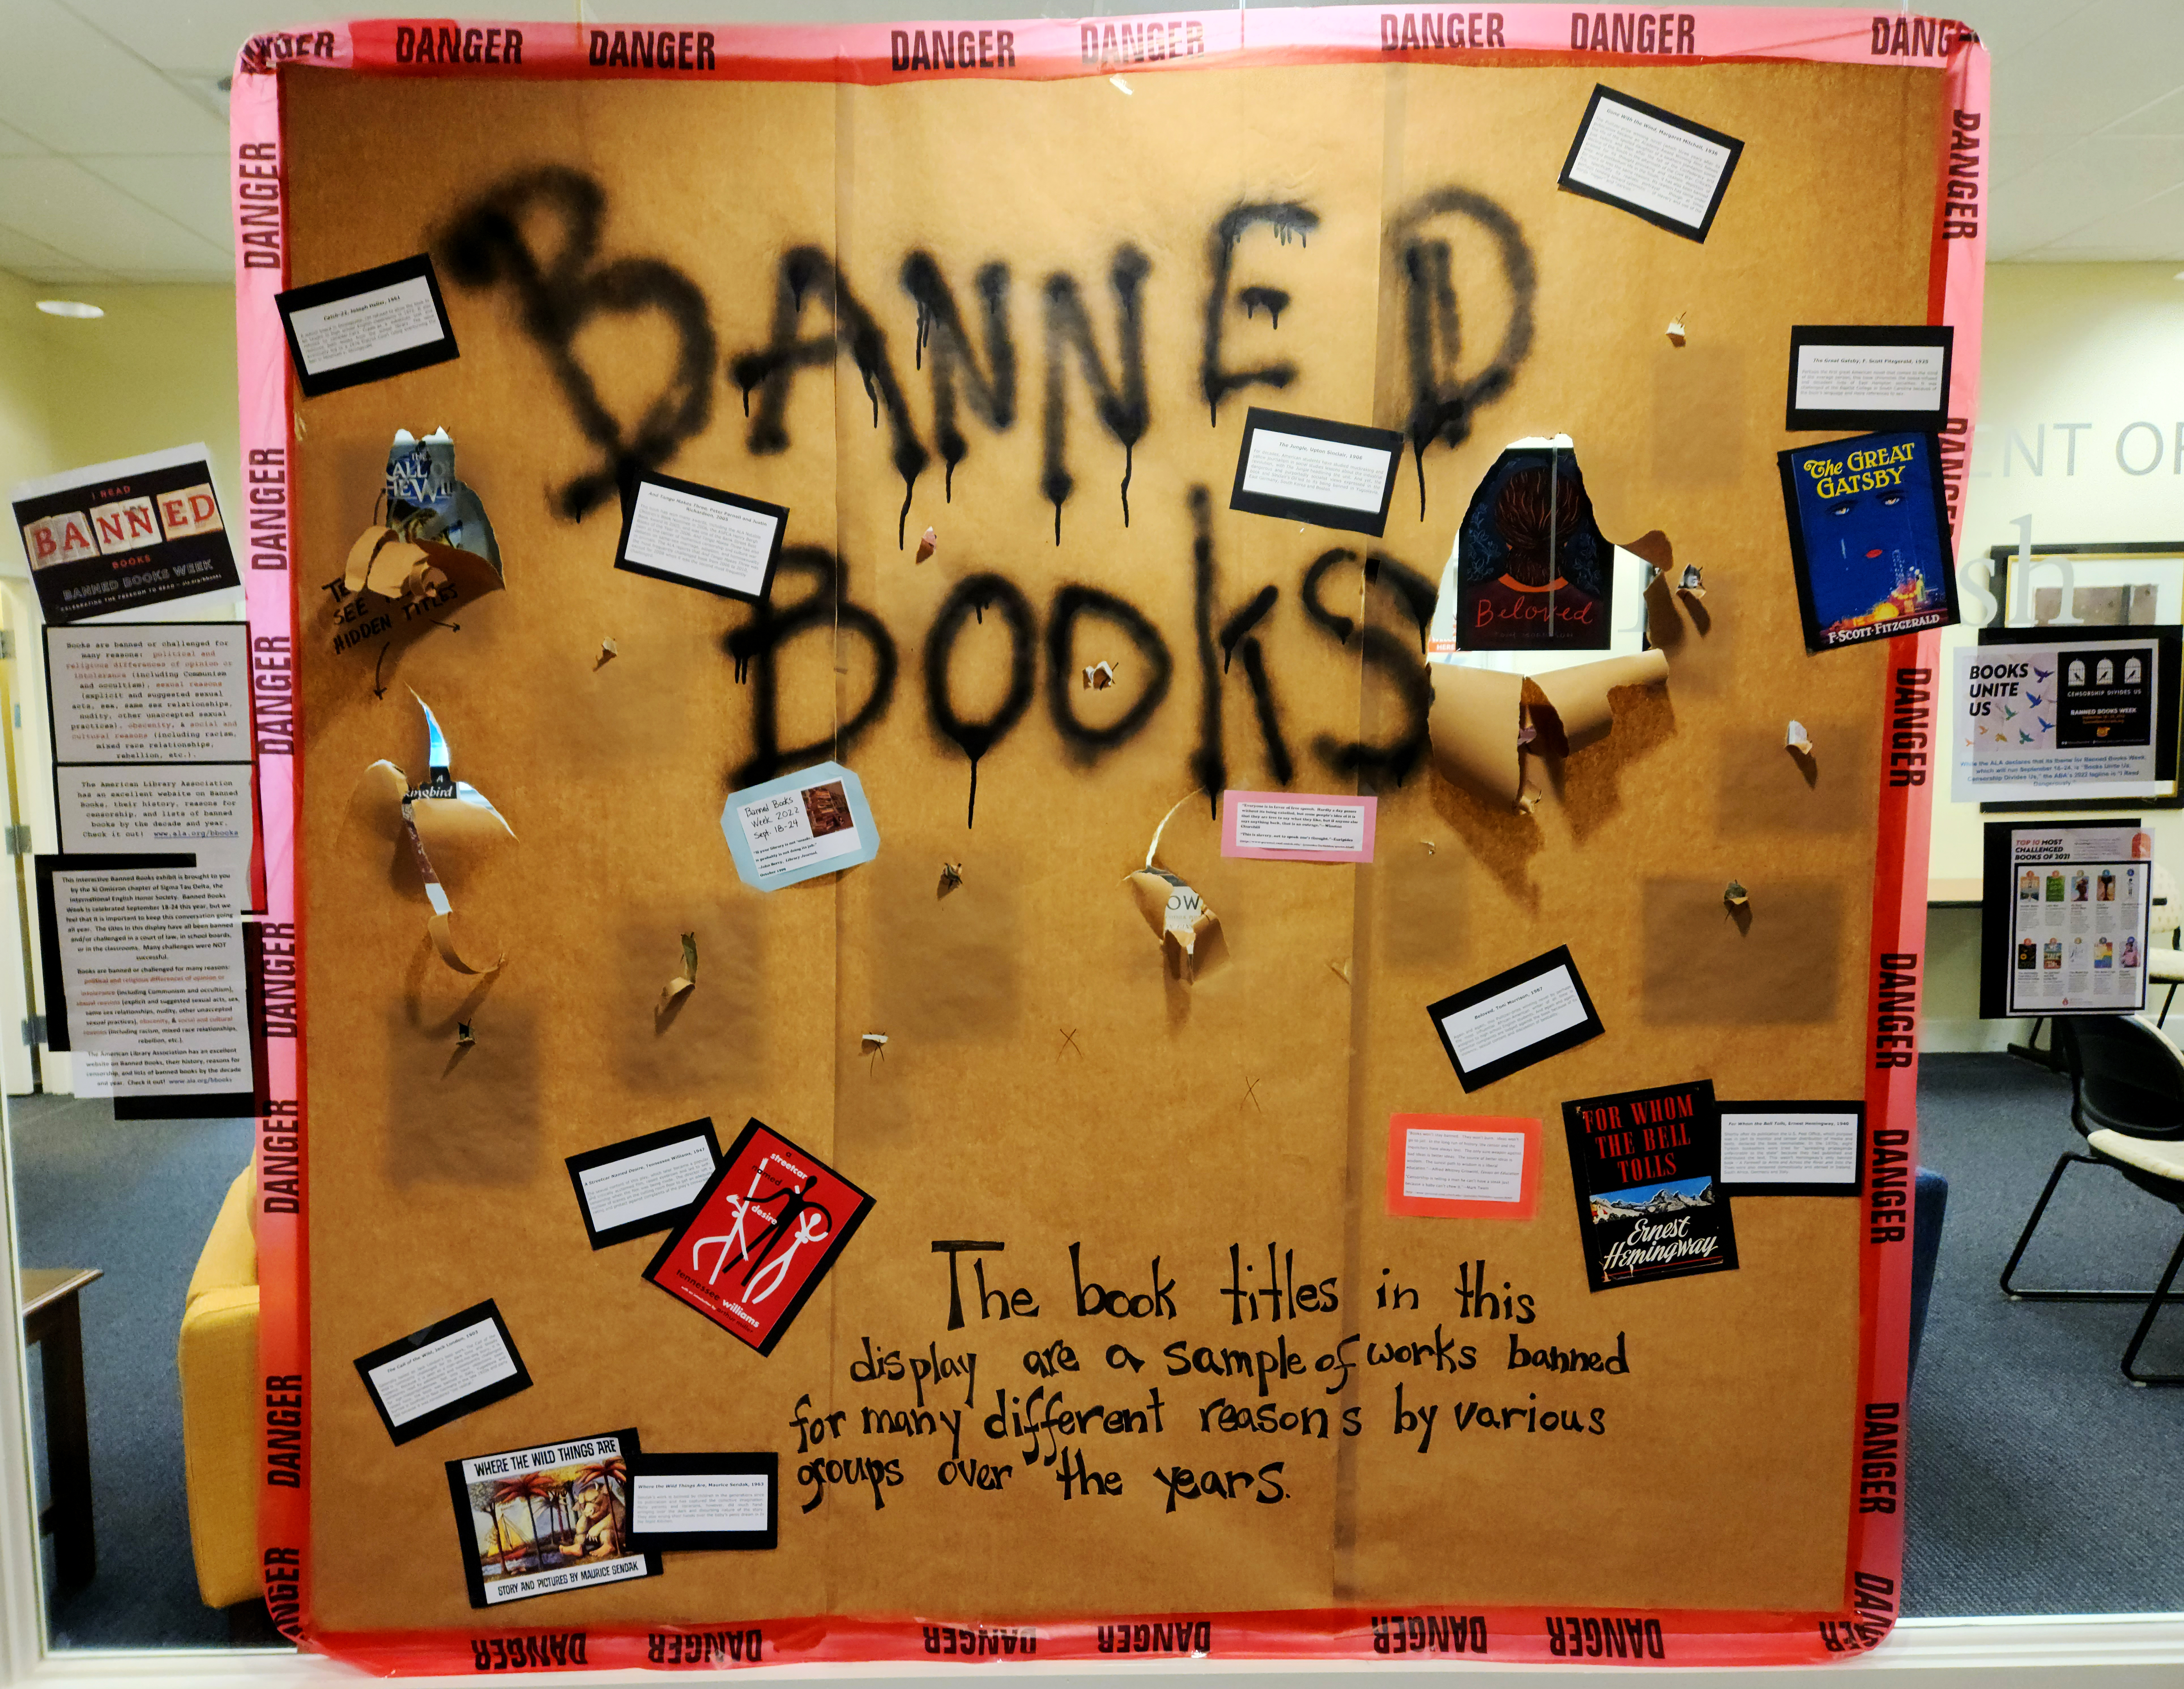 A window display surrounded by warning tape at the English department office invites passersby to tear the paper and reveal the covers of banned books.